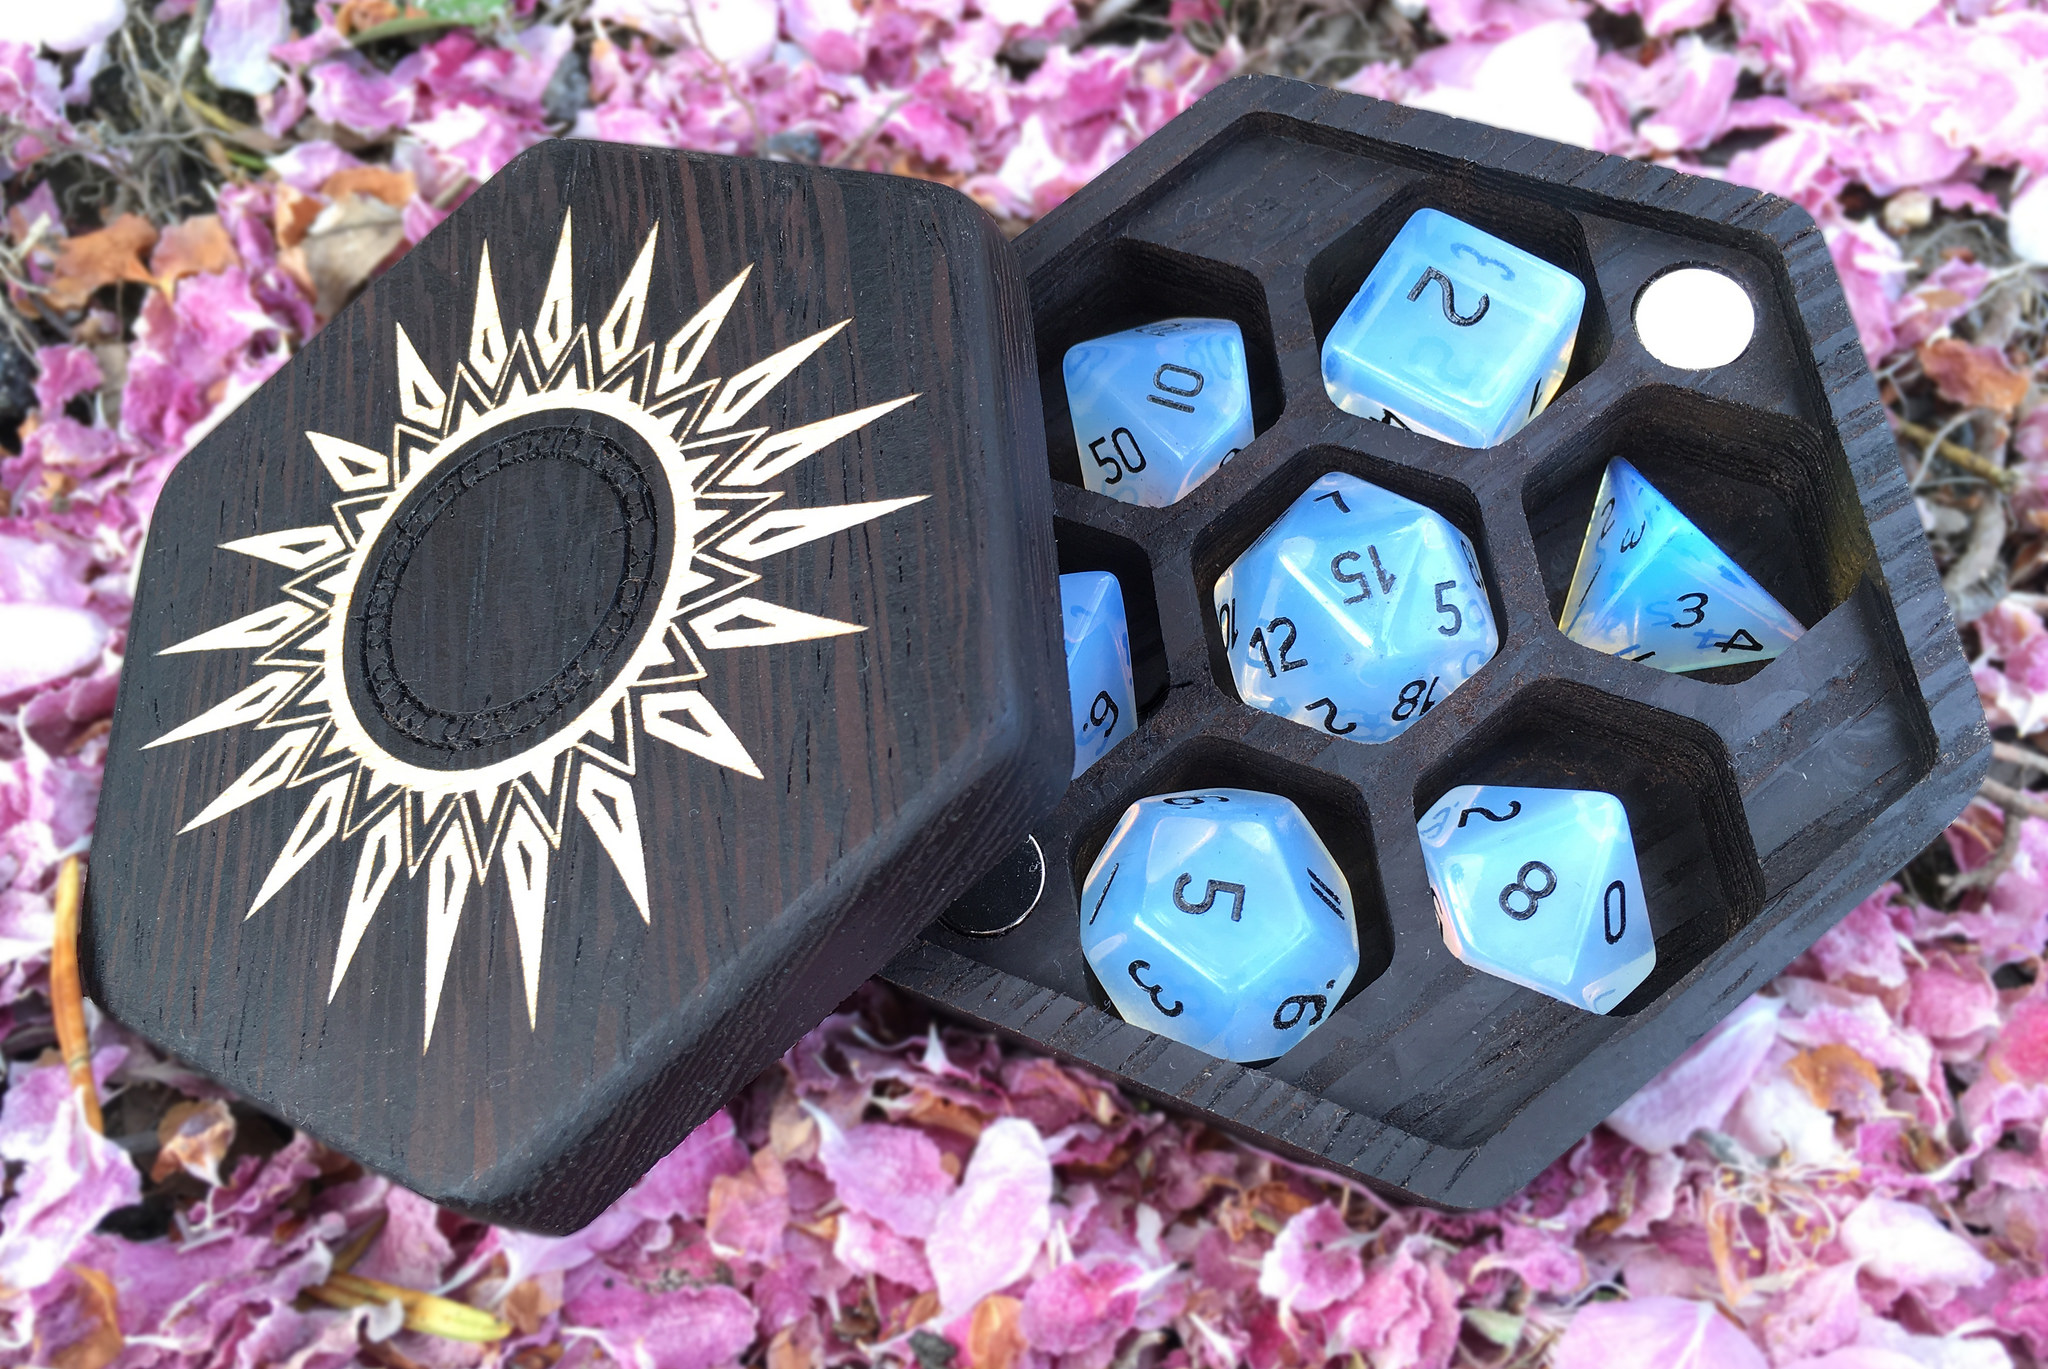 Hex Chest dice box in flower petals with opalite RPG dice